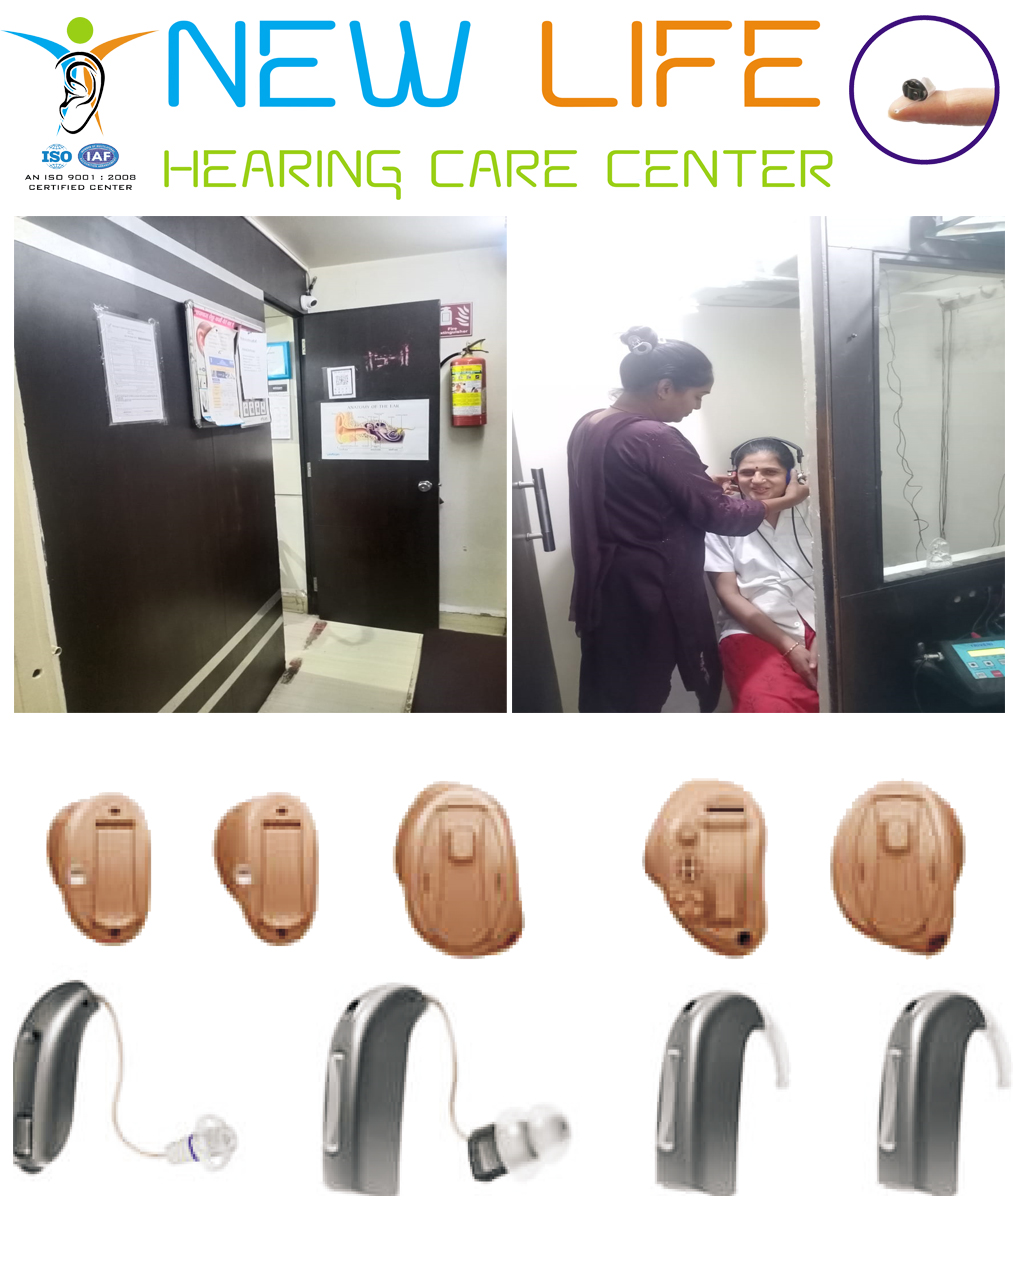 New Life Hearing Care Center